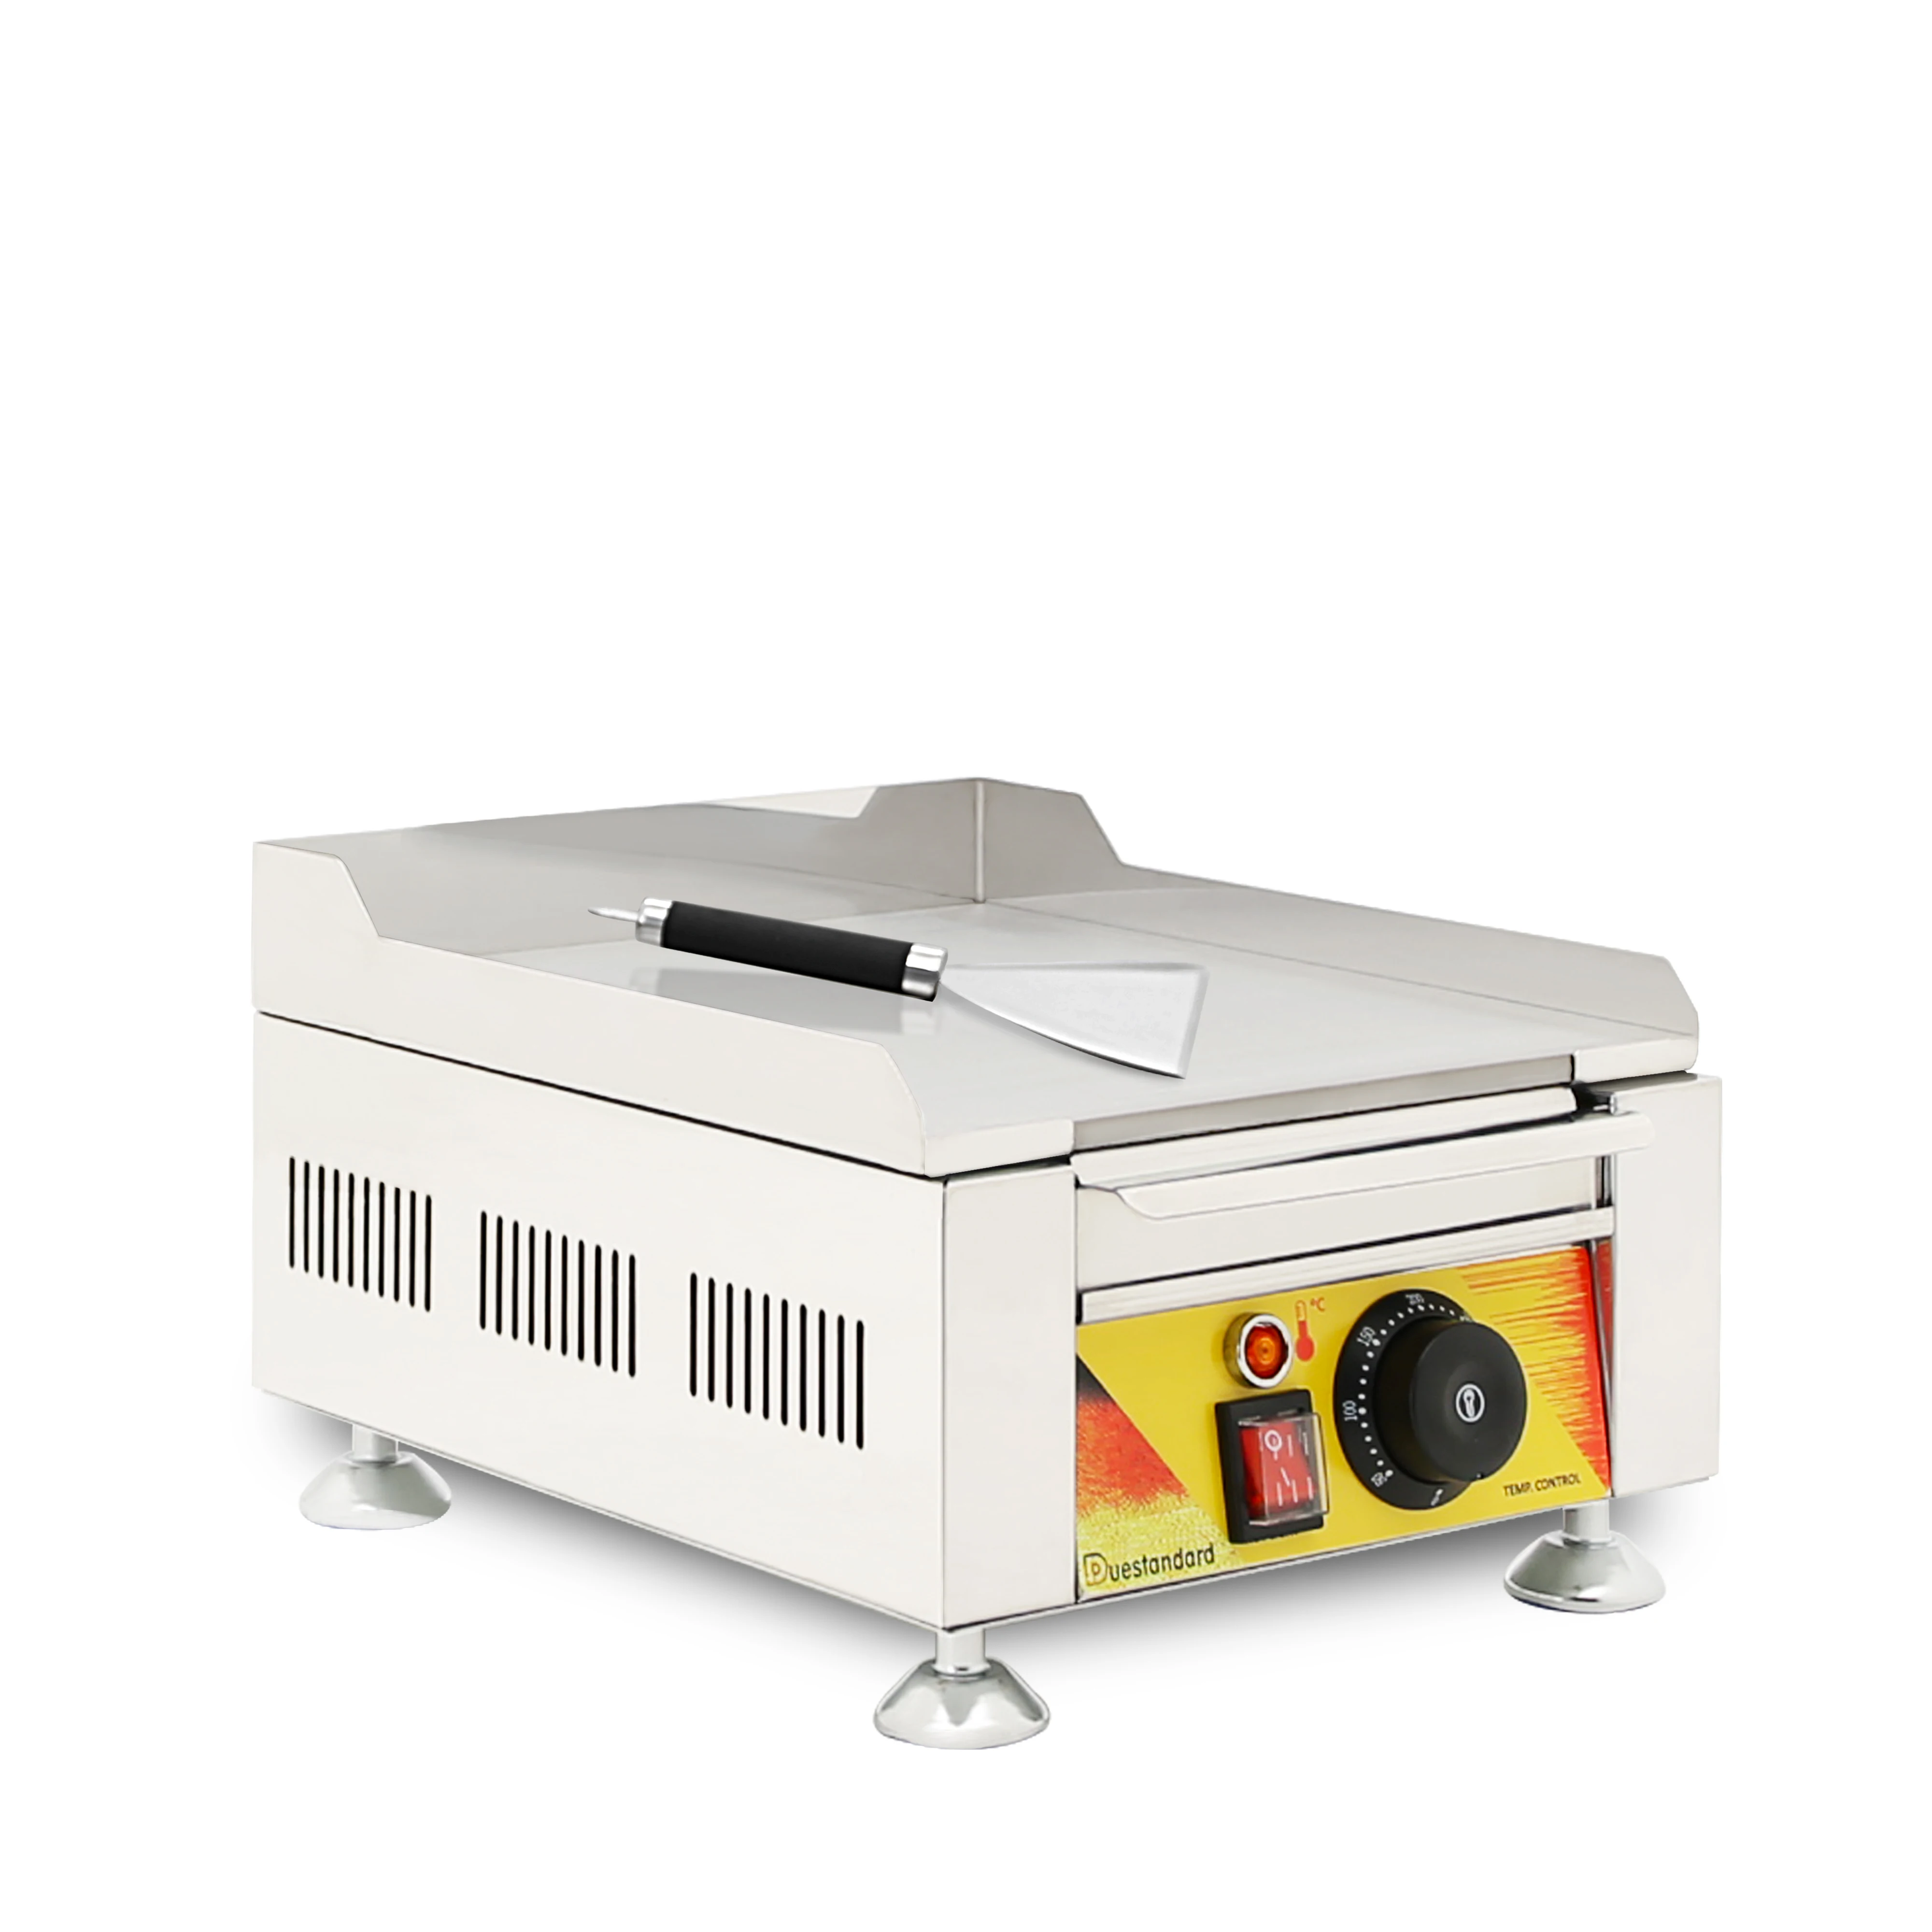 https://ae01.alicdn.com/kf/HTB112vyXL5G3KVjSZPxq6zI3XXam/Commercial-hot-sale-baking-oven-electric-grill-pan-grill-griddle-with-cheaper-price-in-china-on.jpg